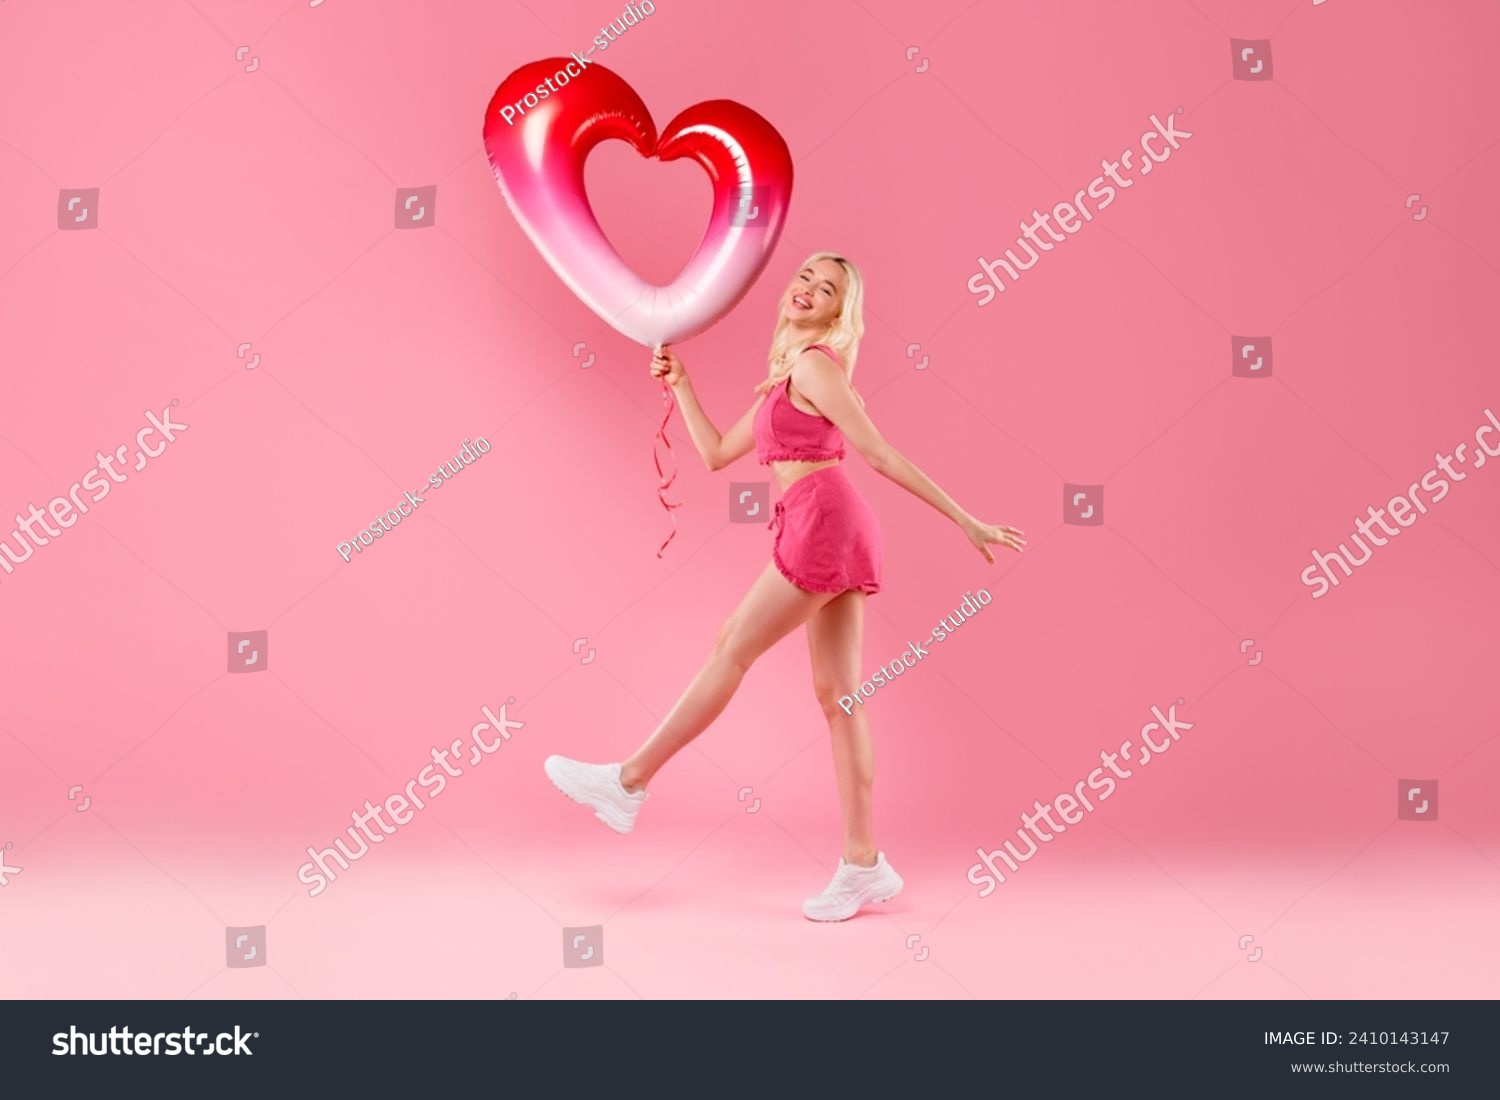 Blonde girl joyfully dancing, holding a red and white heart balloon, in pink fuzzy outfit with sneakers on a pink background, feeling elated, full length #2410143147